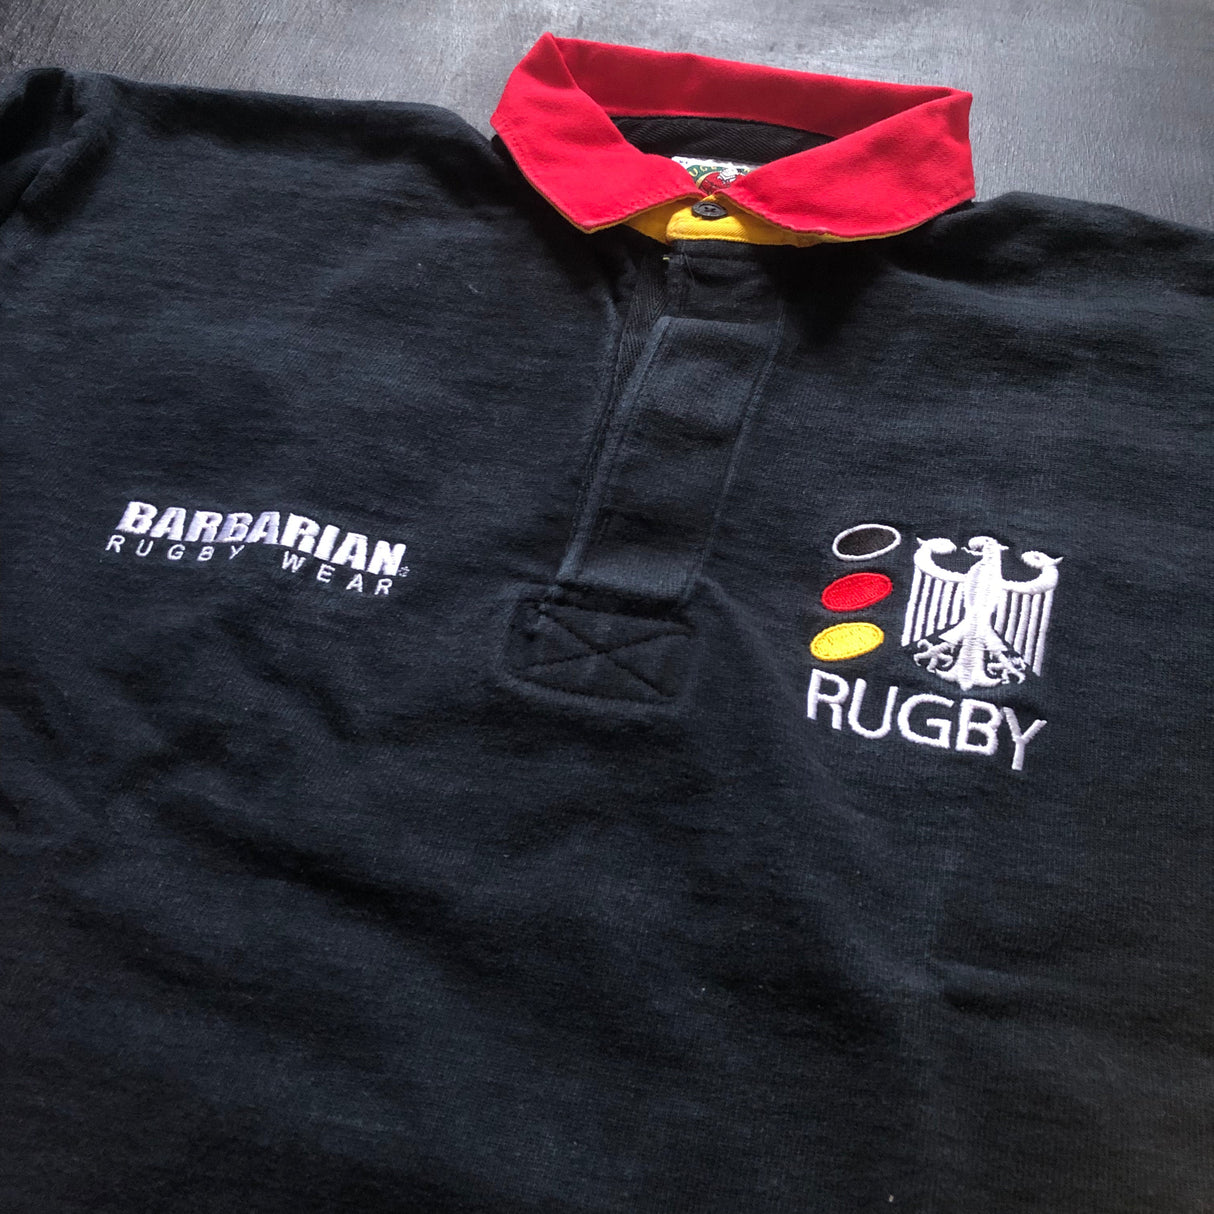 Germany National Rigby Team Jersey 2003/2004 XL Underdog Rugby - The Tier 2 Rugby Shop 